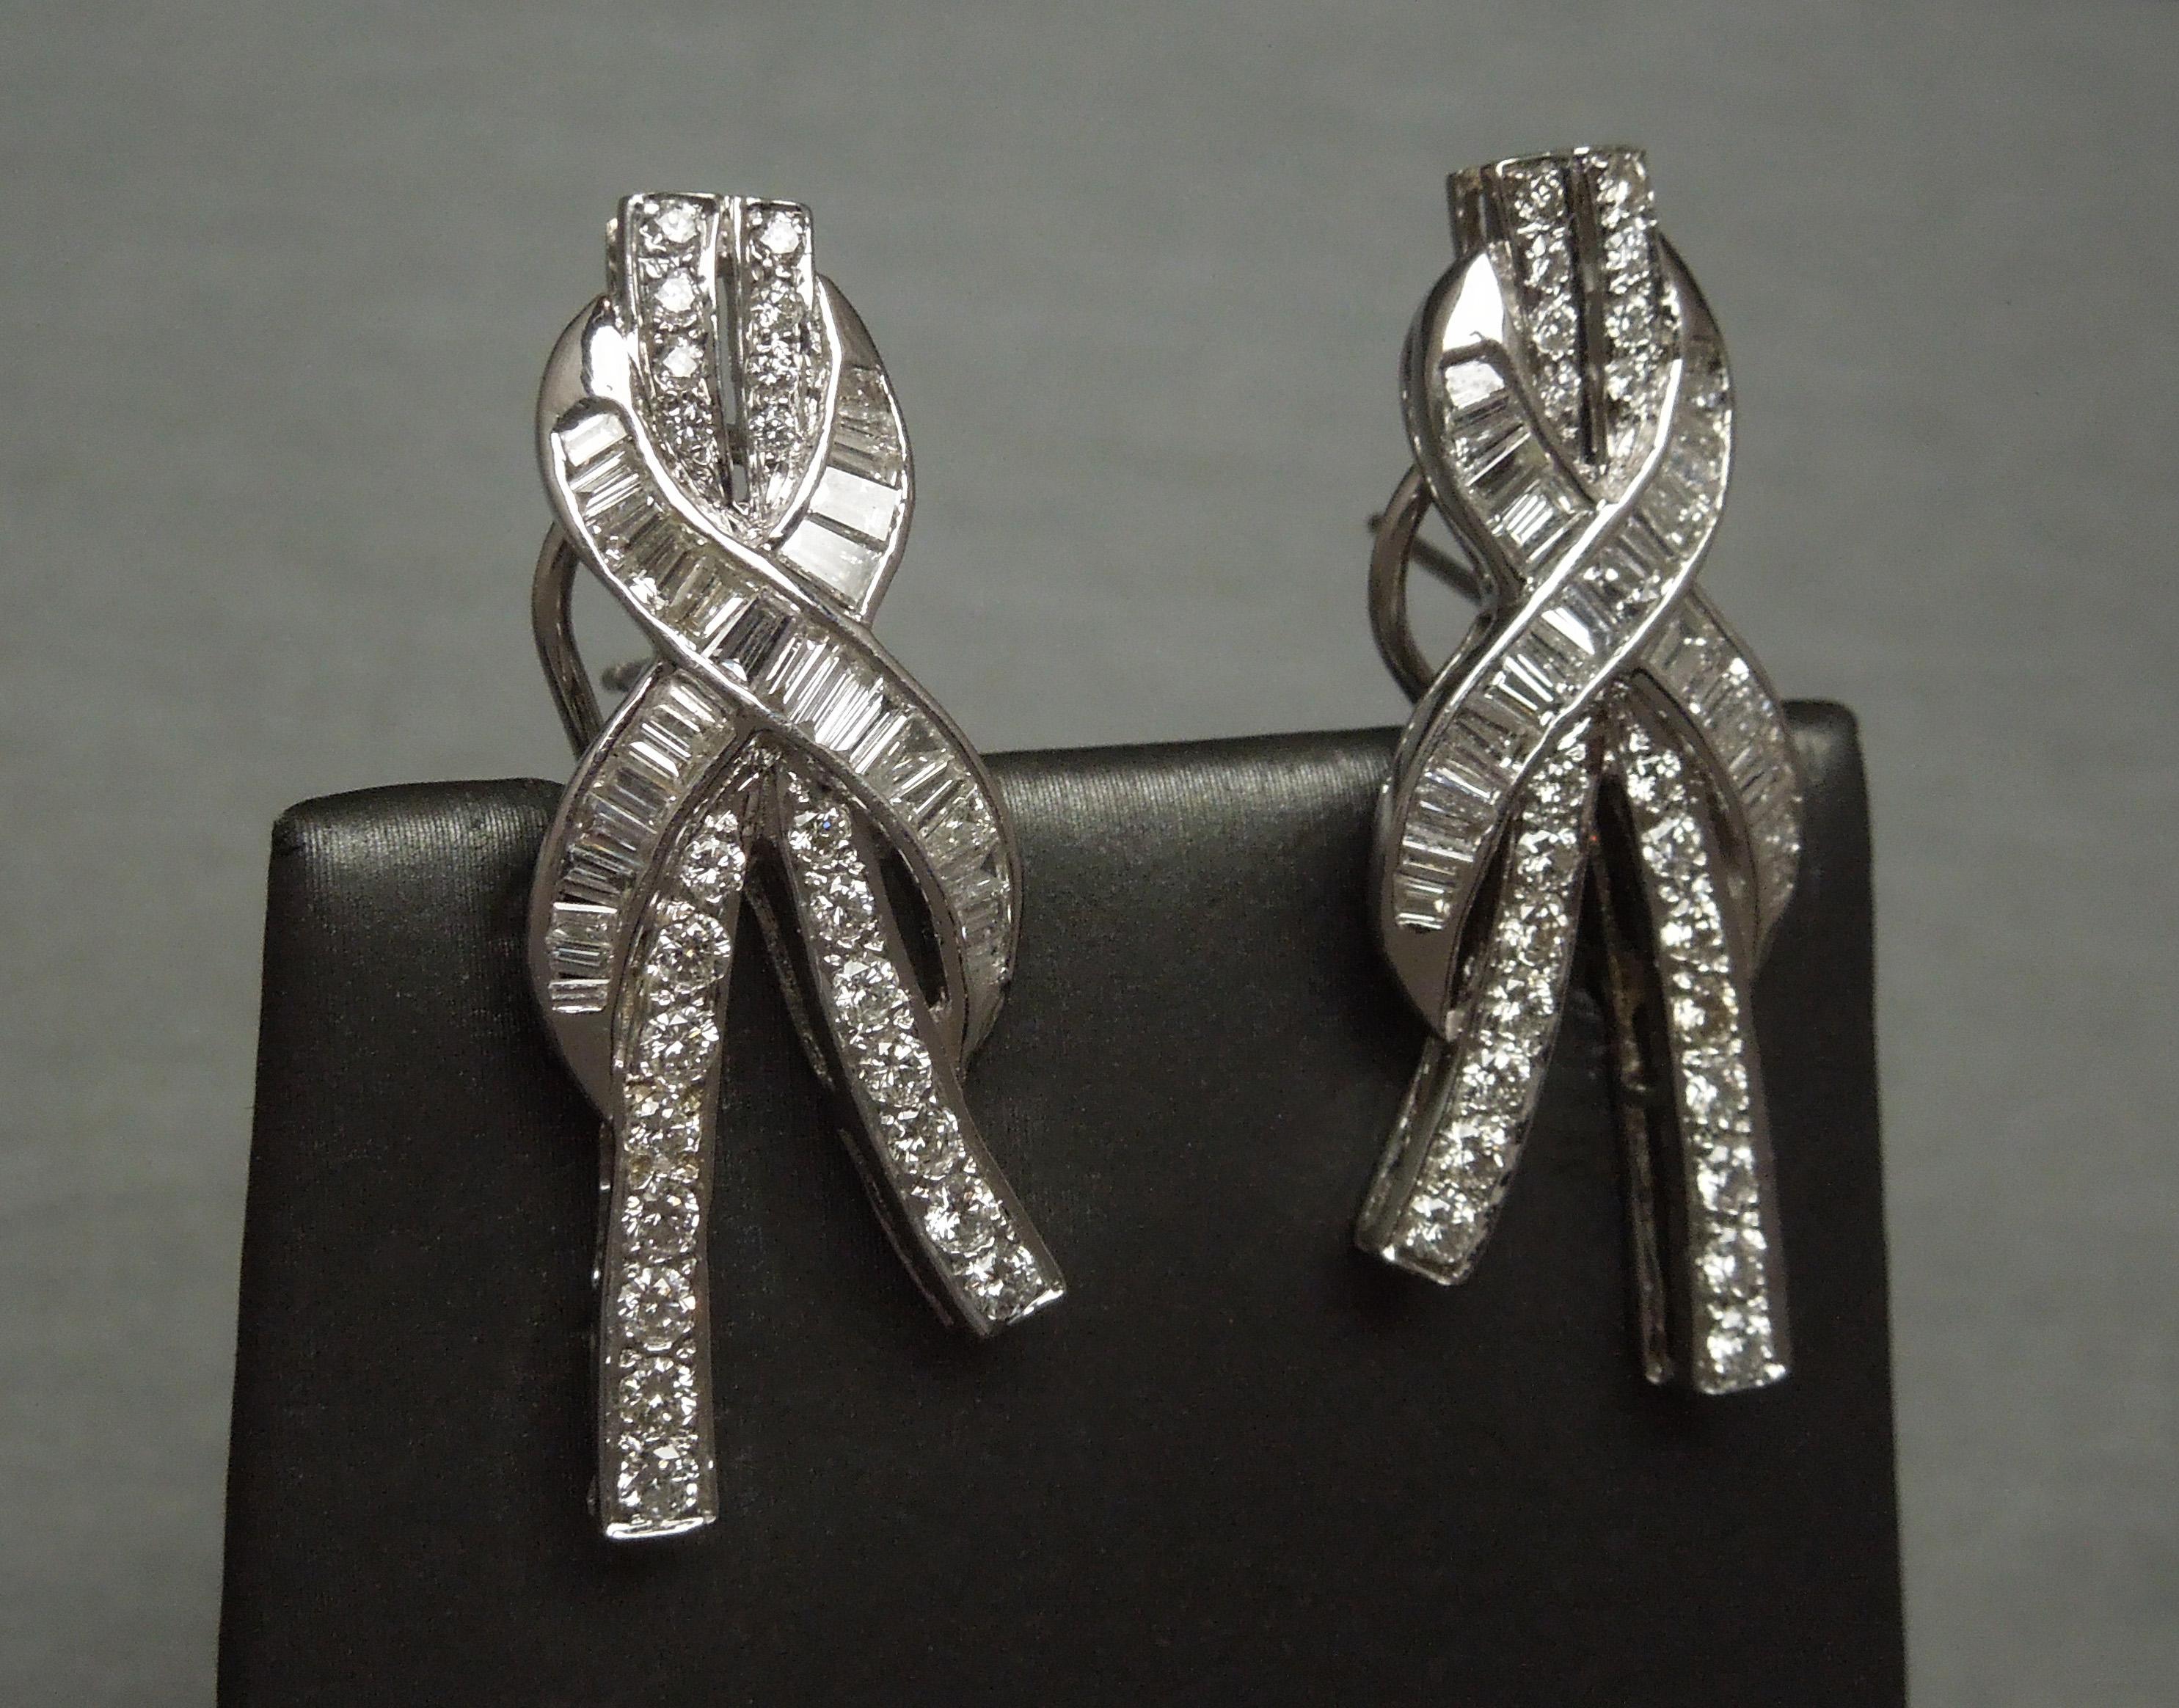 These Mid Century Baguette Ribbon Earrings constructed in 18KT White Gold contain a total of 4.50 carats of Colorless Nearly Flawless Brilliant cuts & Baguettes - all ranking an E-F Color; VVS1-SI2 Clarity [90% are VVS] .. A hand-fabricated matched